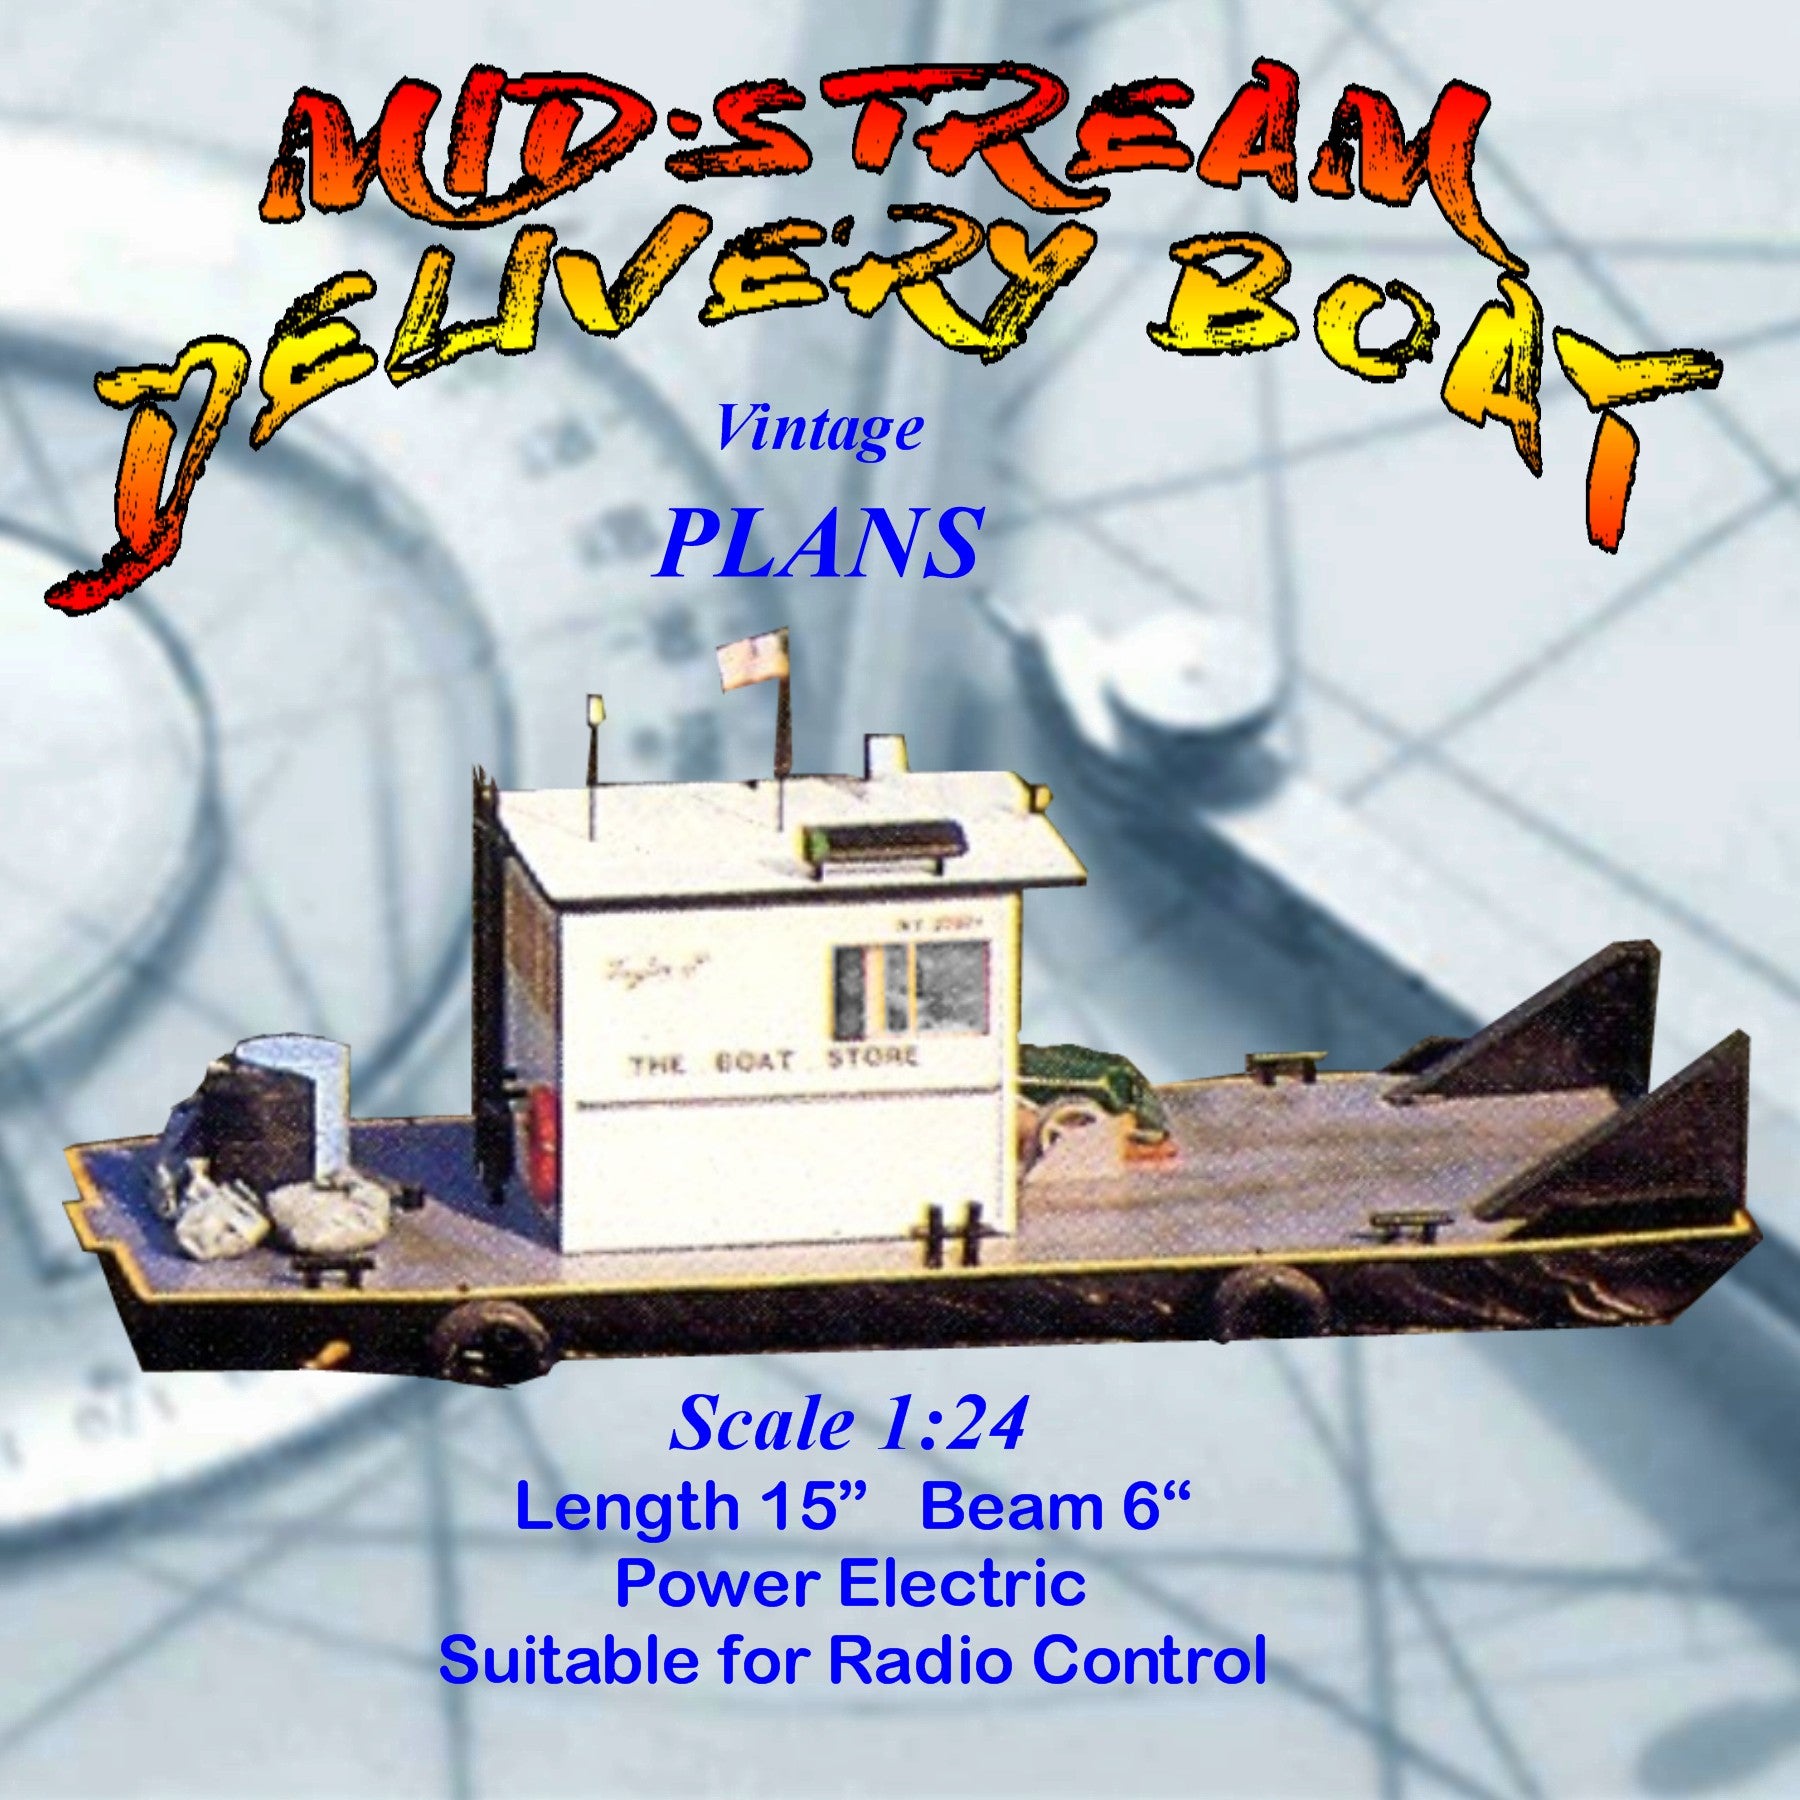 full size printed plans scale 1:24 mid · stream delivery boat suitable for radio control